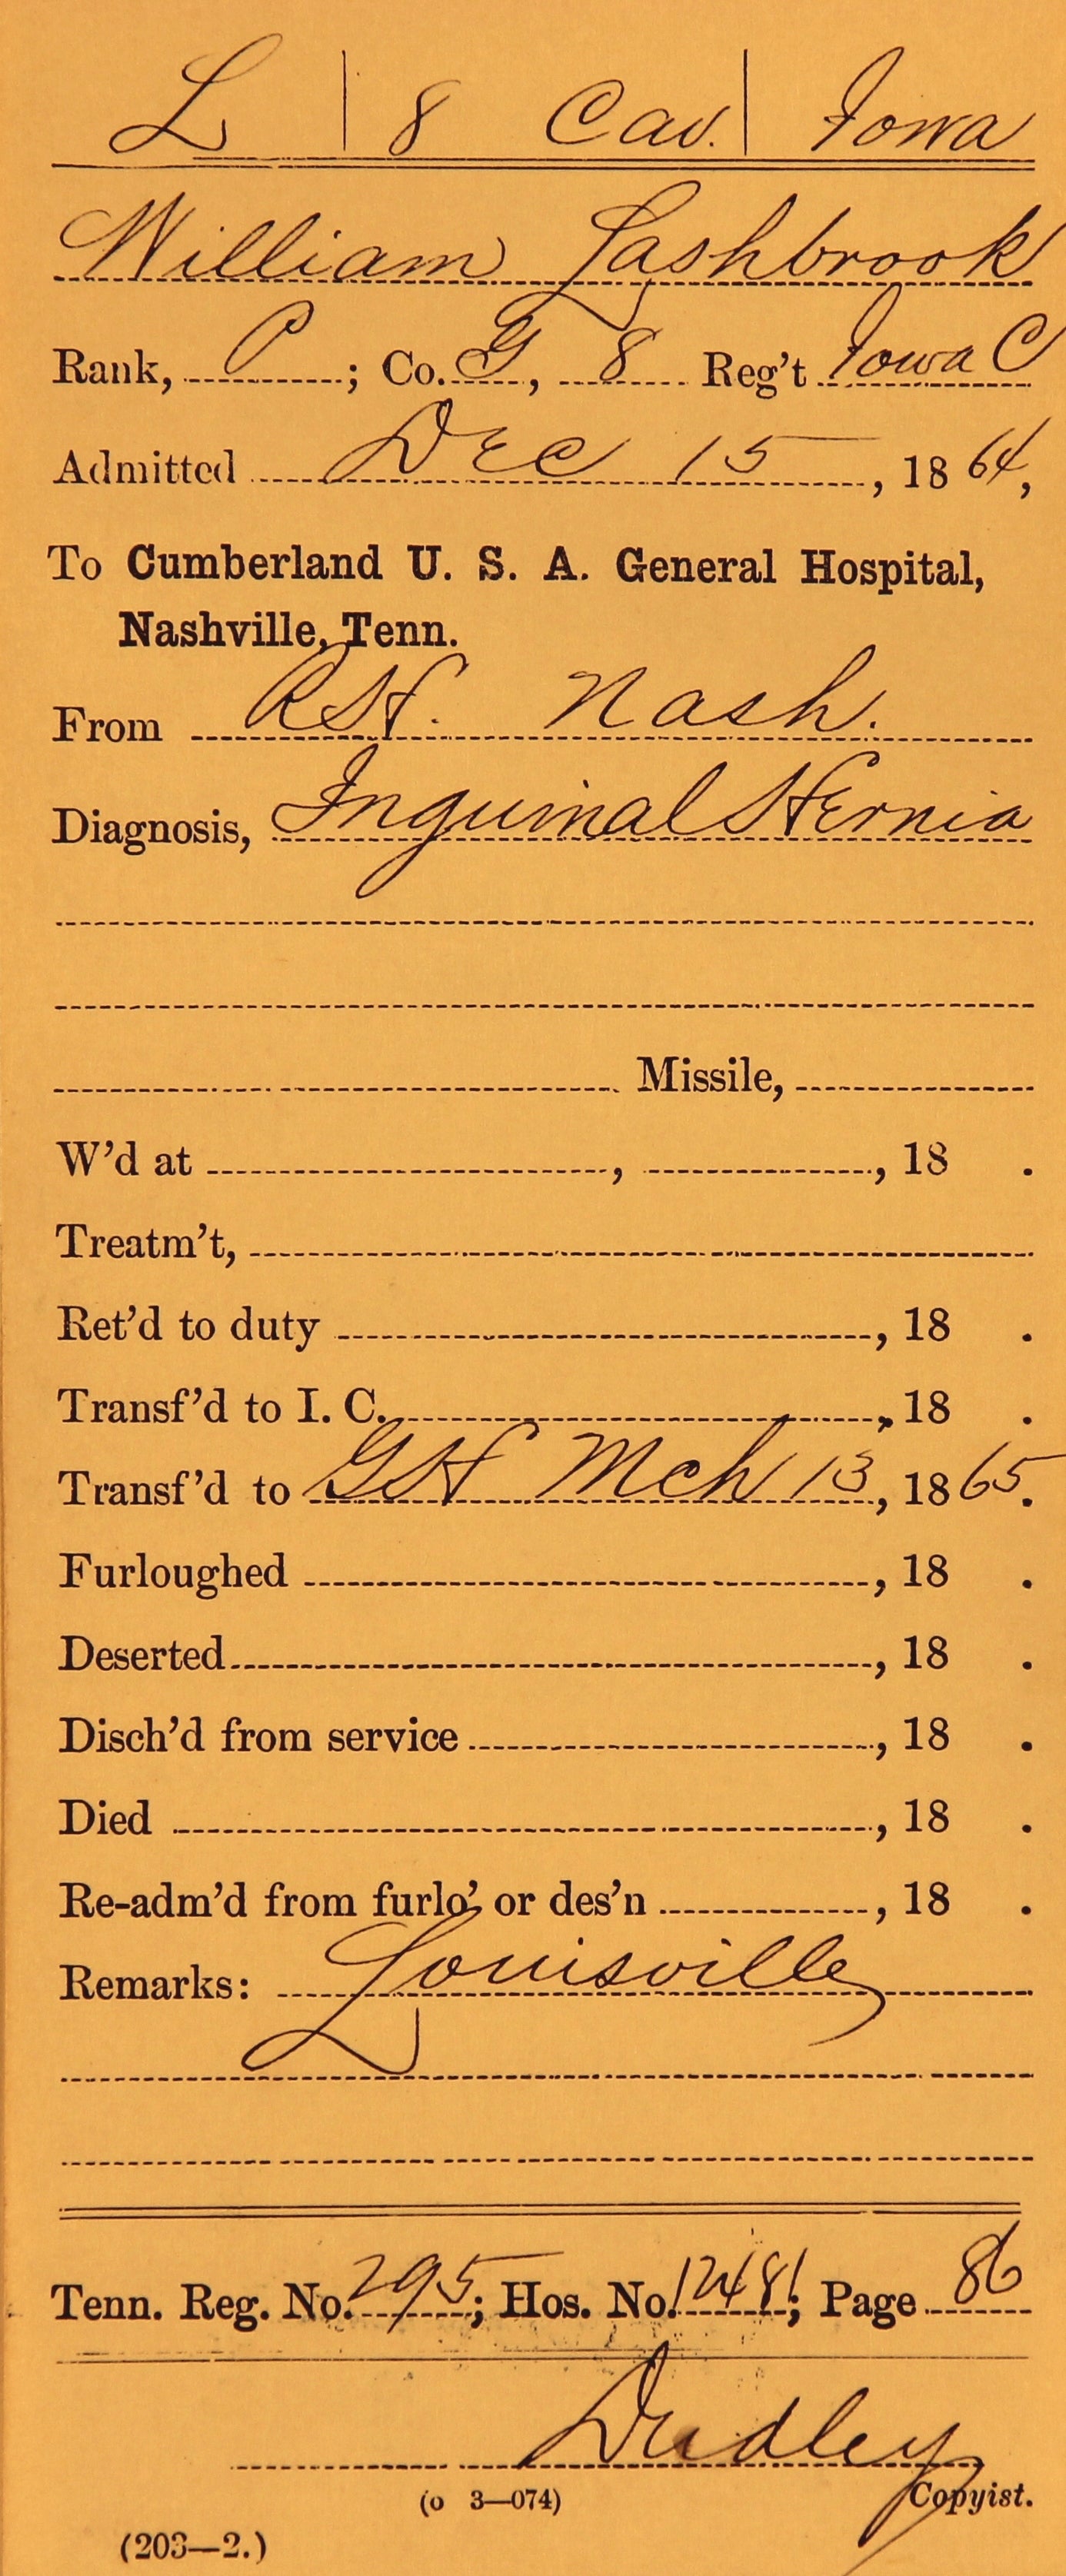 Hospital card record containing the soldier's name, rank, service, diagnosis, name, admission date, hospital location, and treatment outcome. 